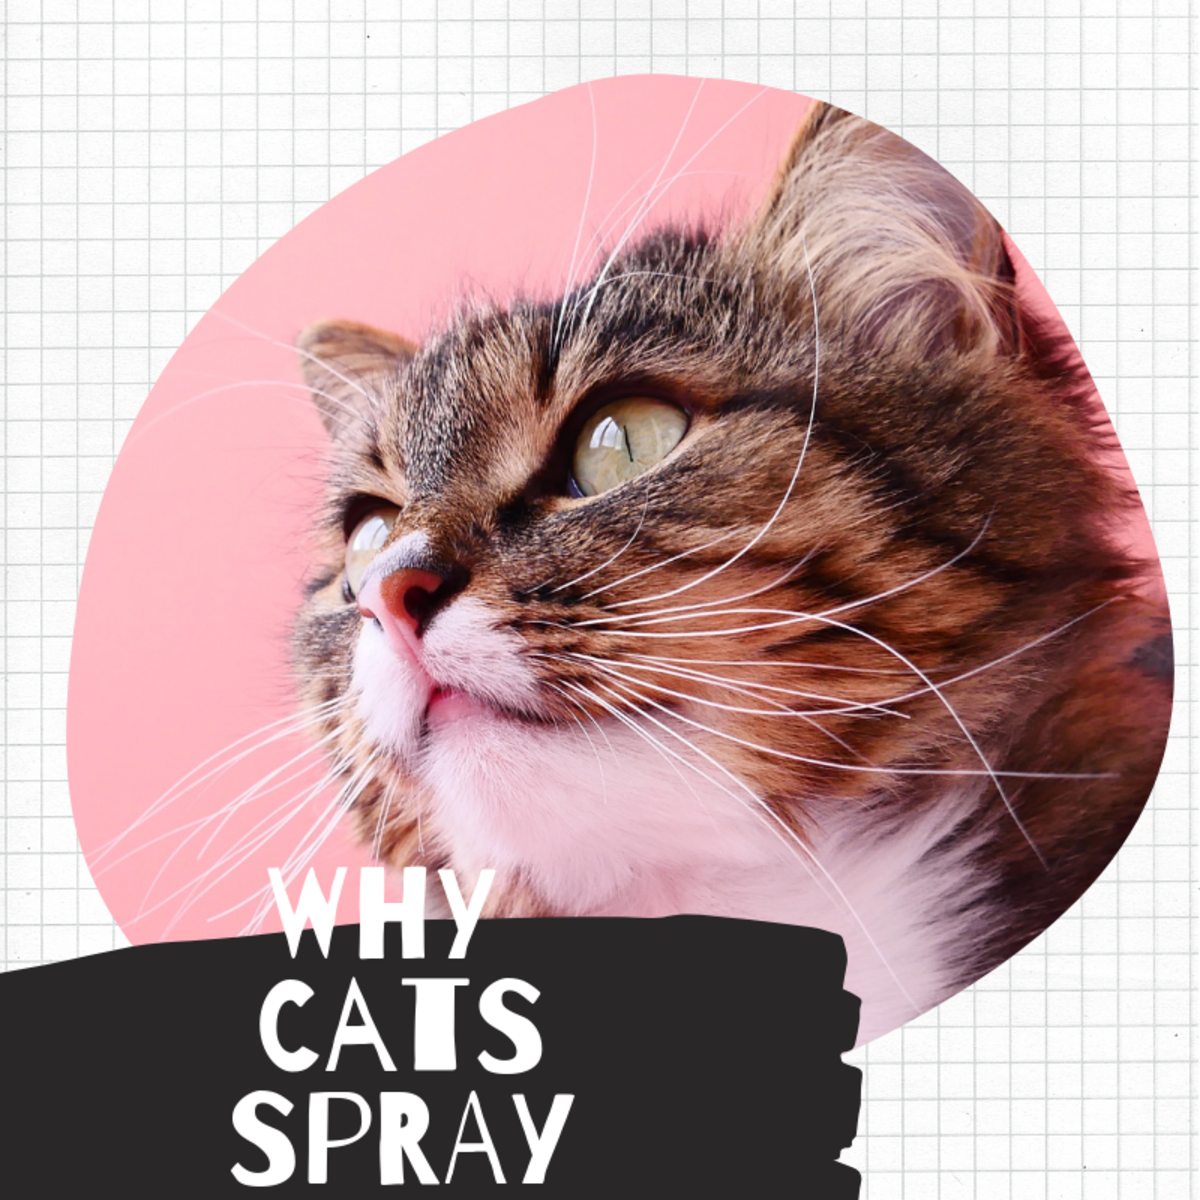 Figure out why cats spray. 